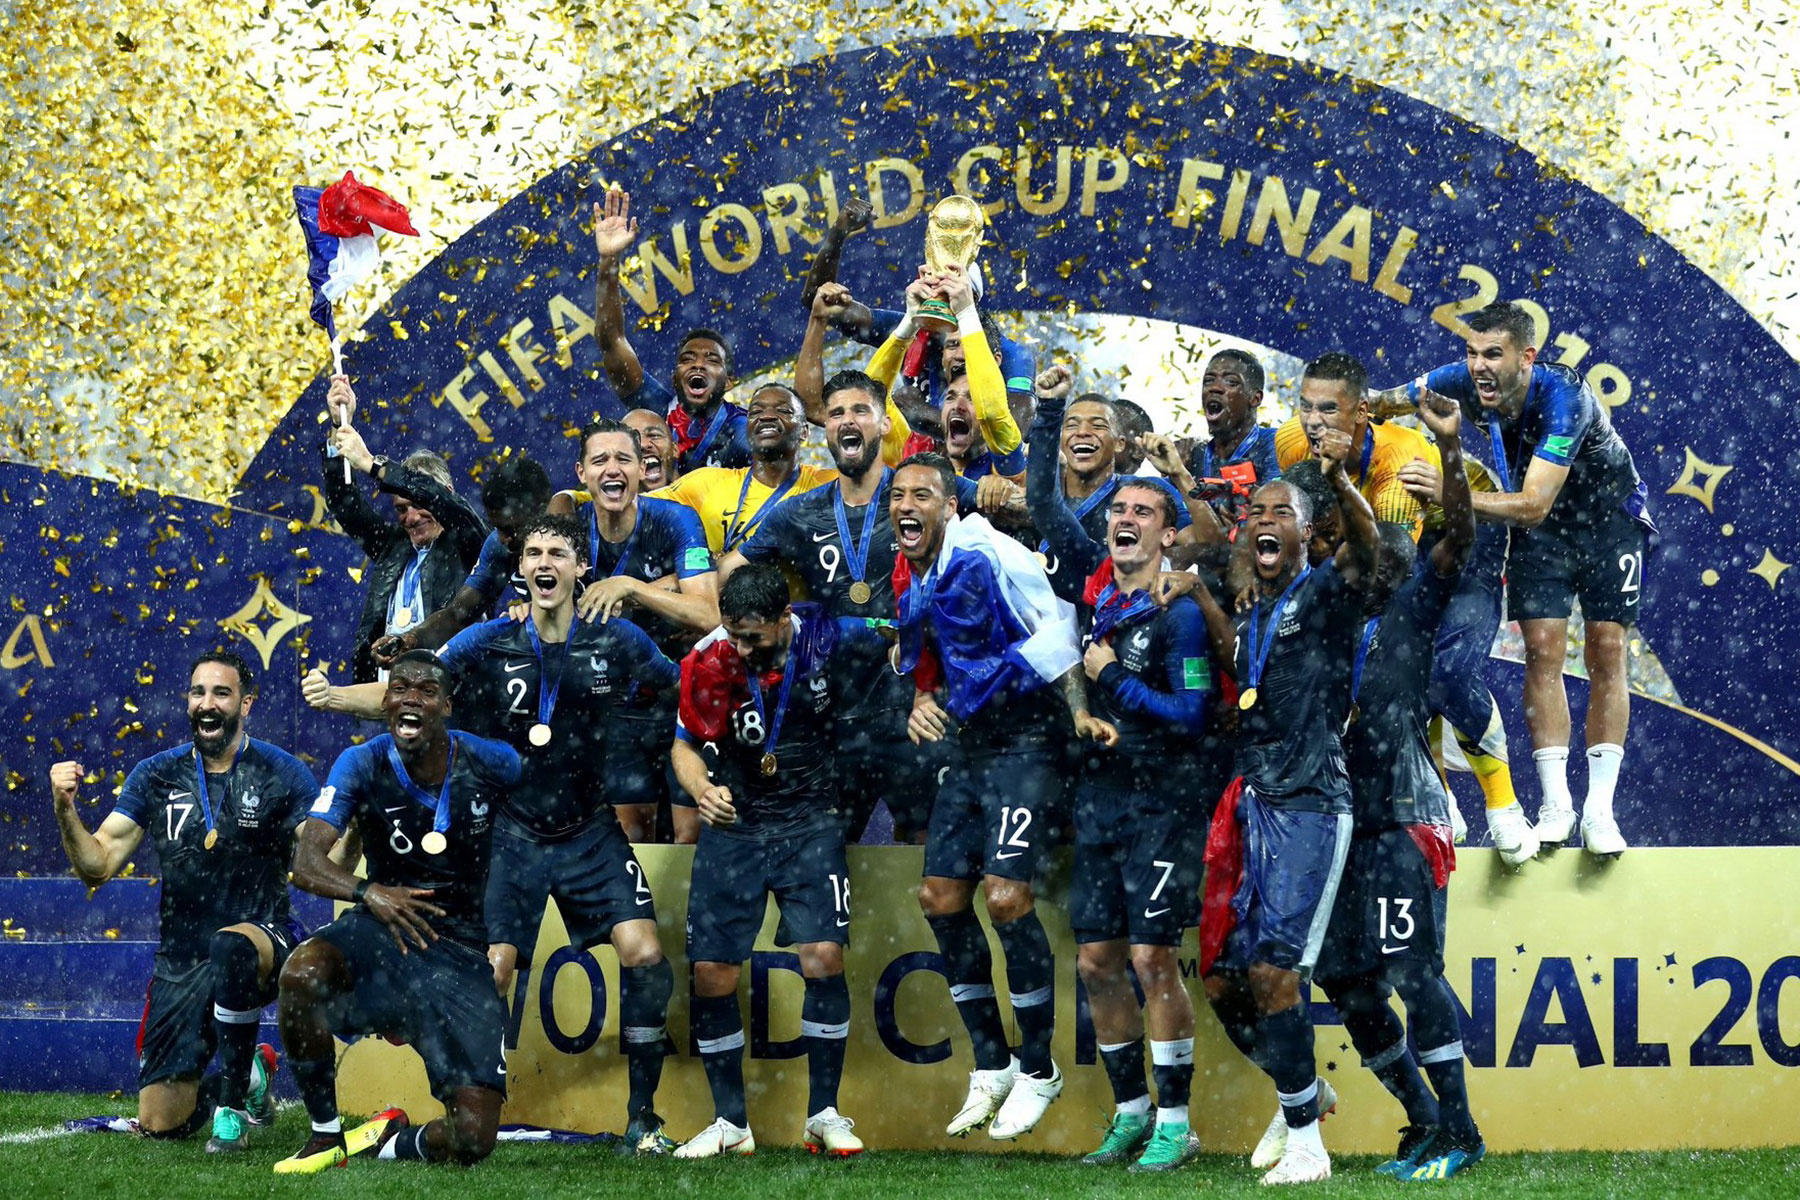  The image shows the French football team celebrating their victory in the 2018 FIFA World Cup. They are wearing their away jersey which is predominantly white with a blue stripe on the chest.